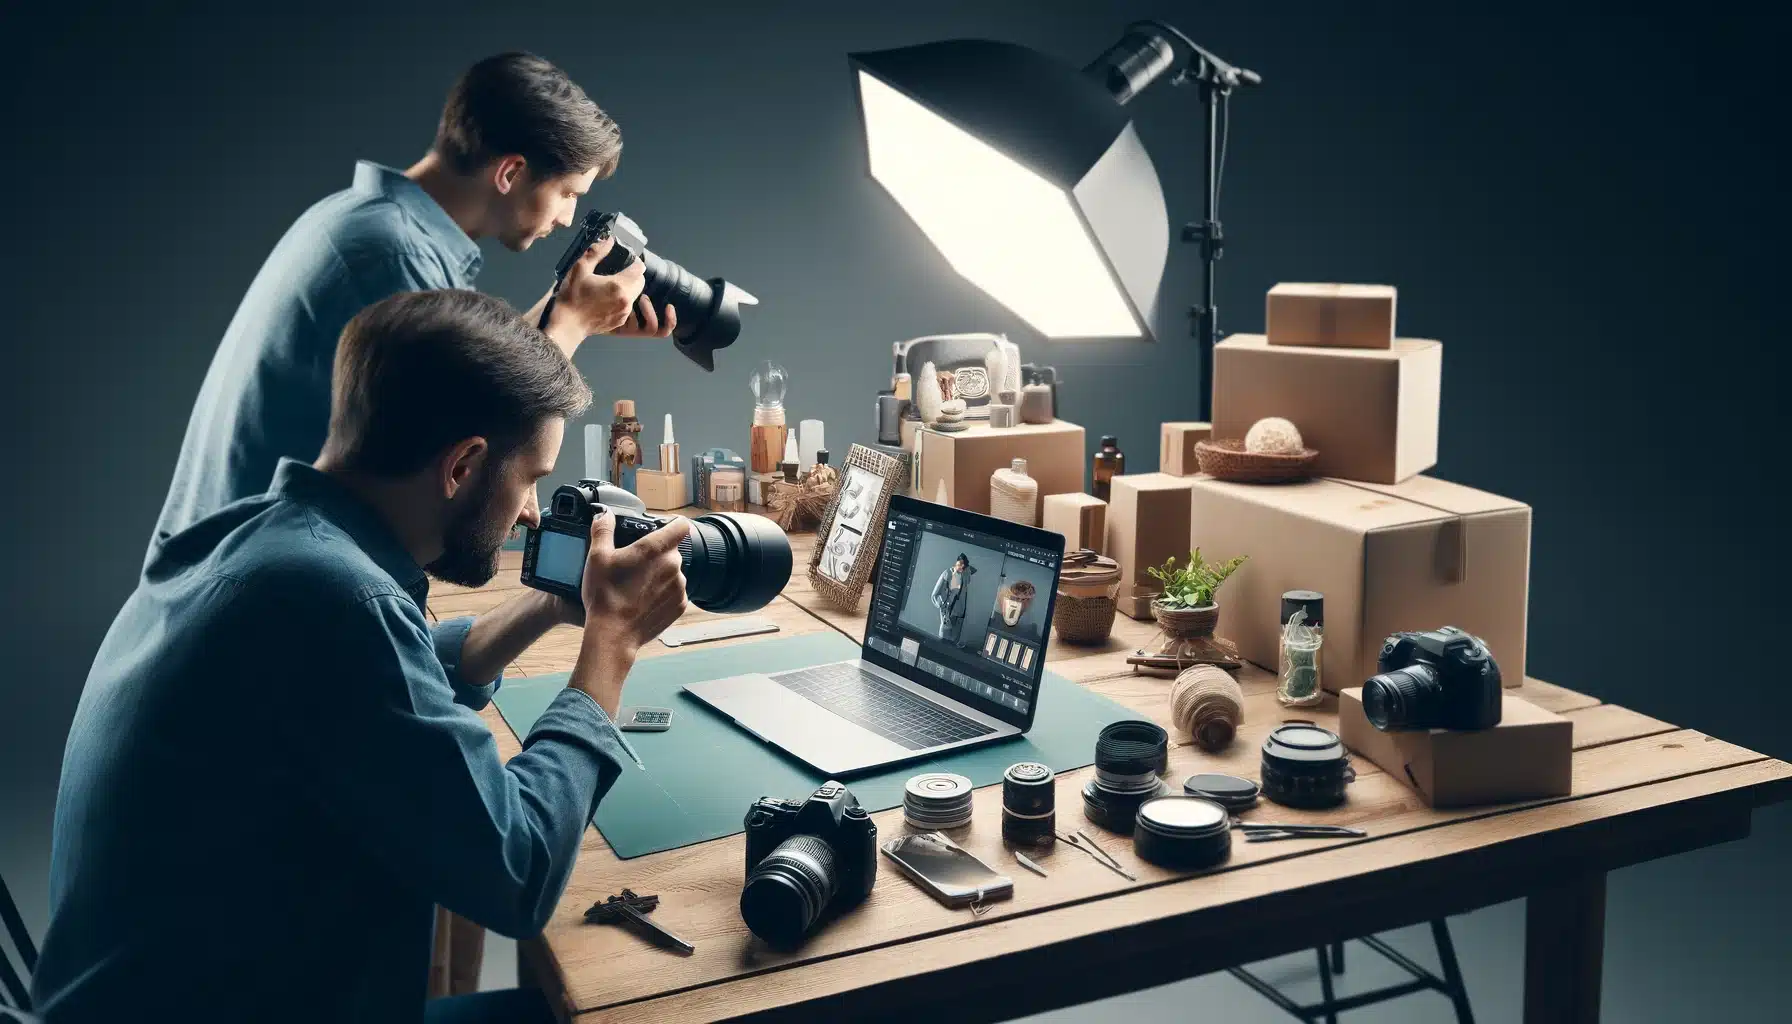 Two photographers in a studio capturing stunning images of products on a table, using professional lighting and camera equipment.